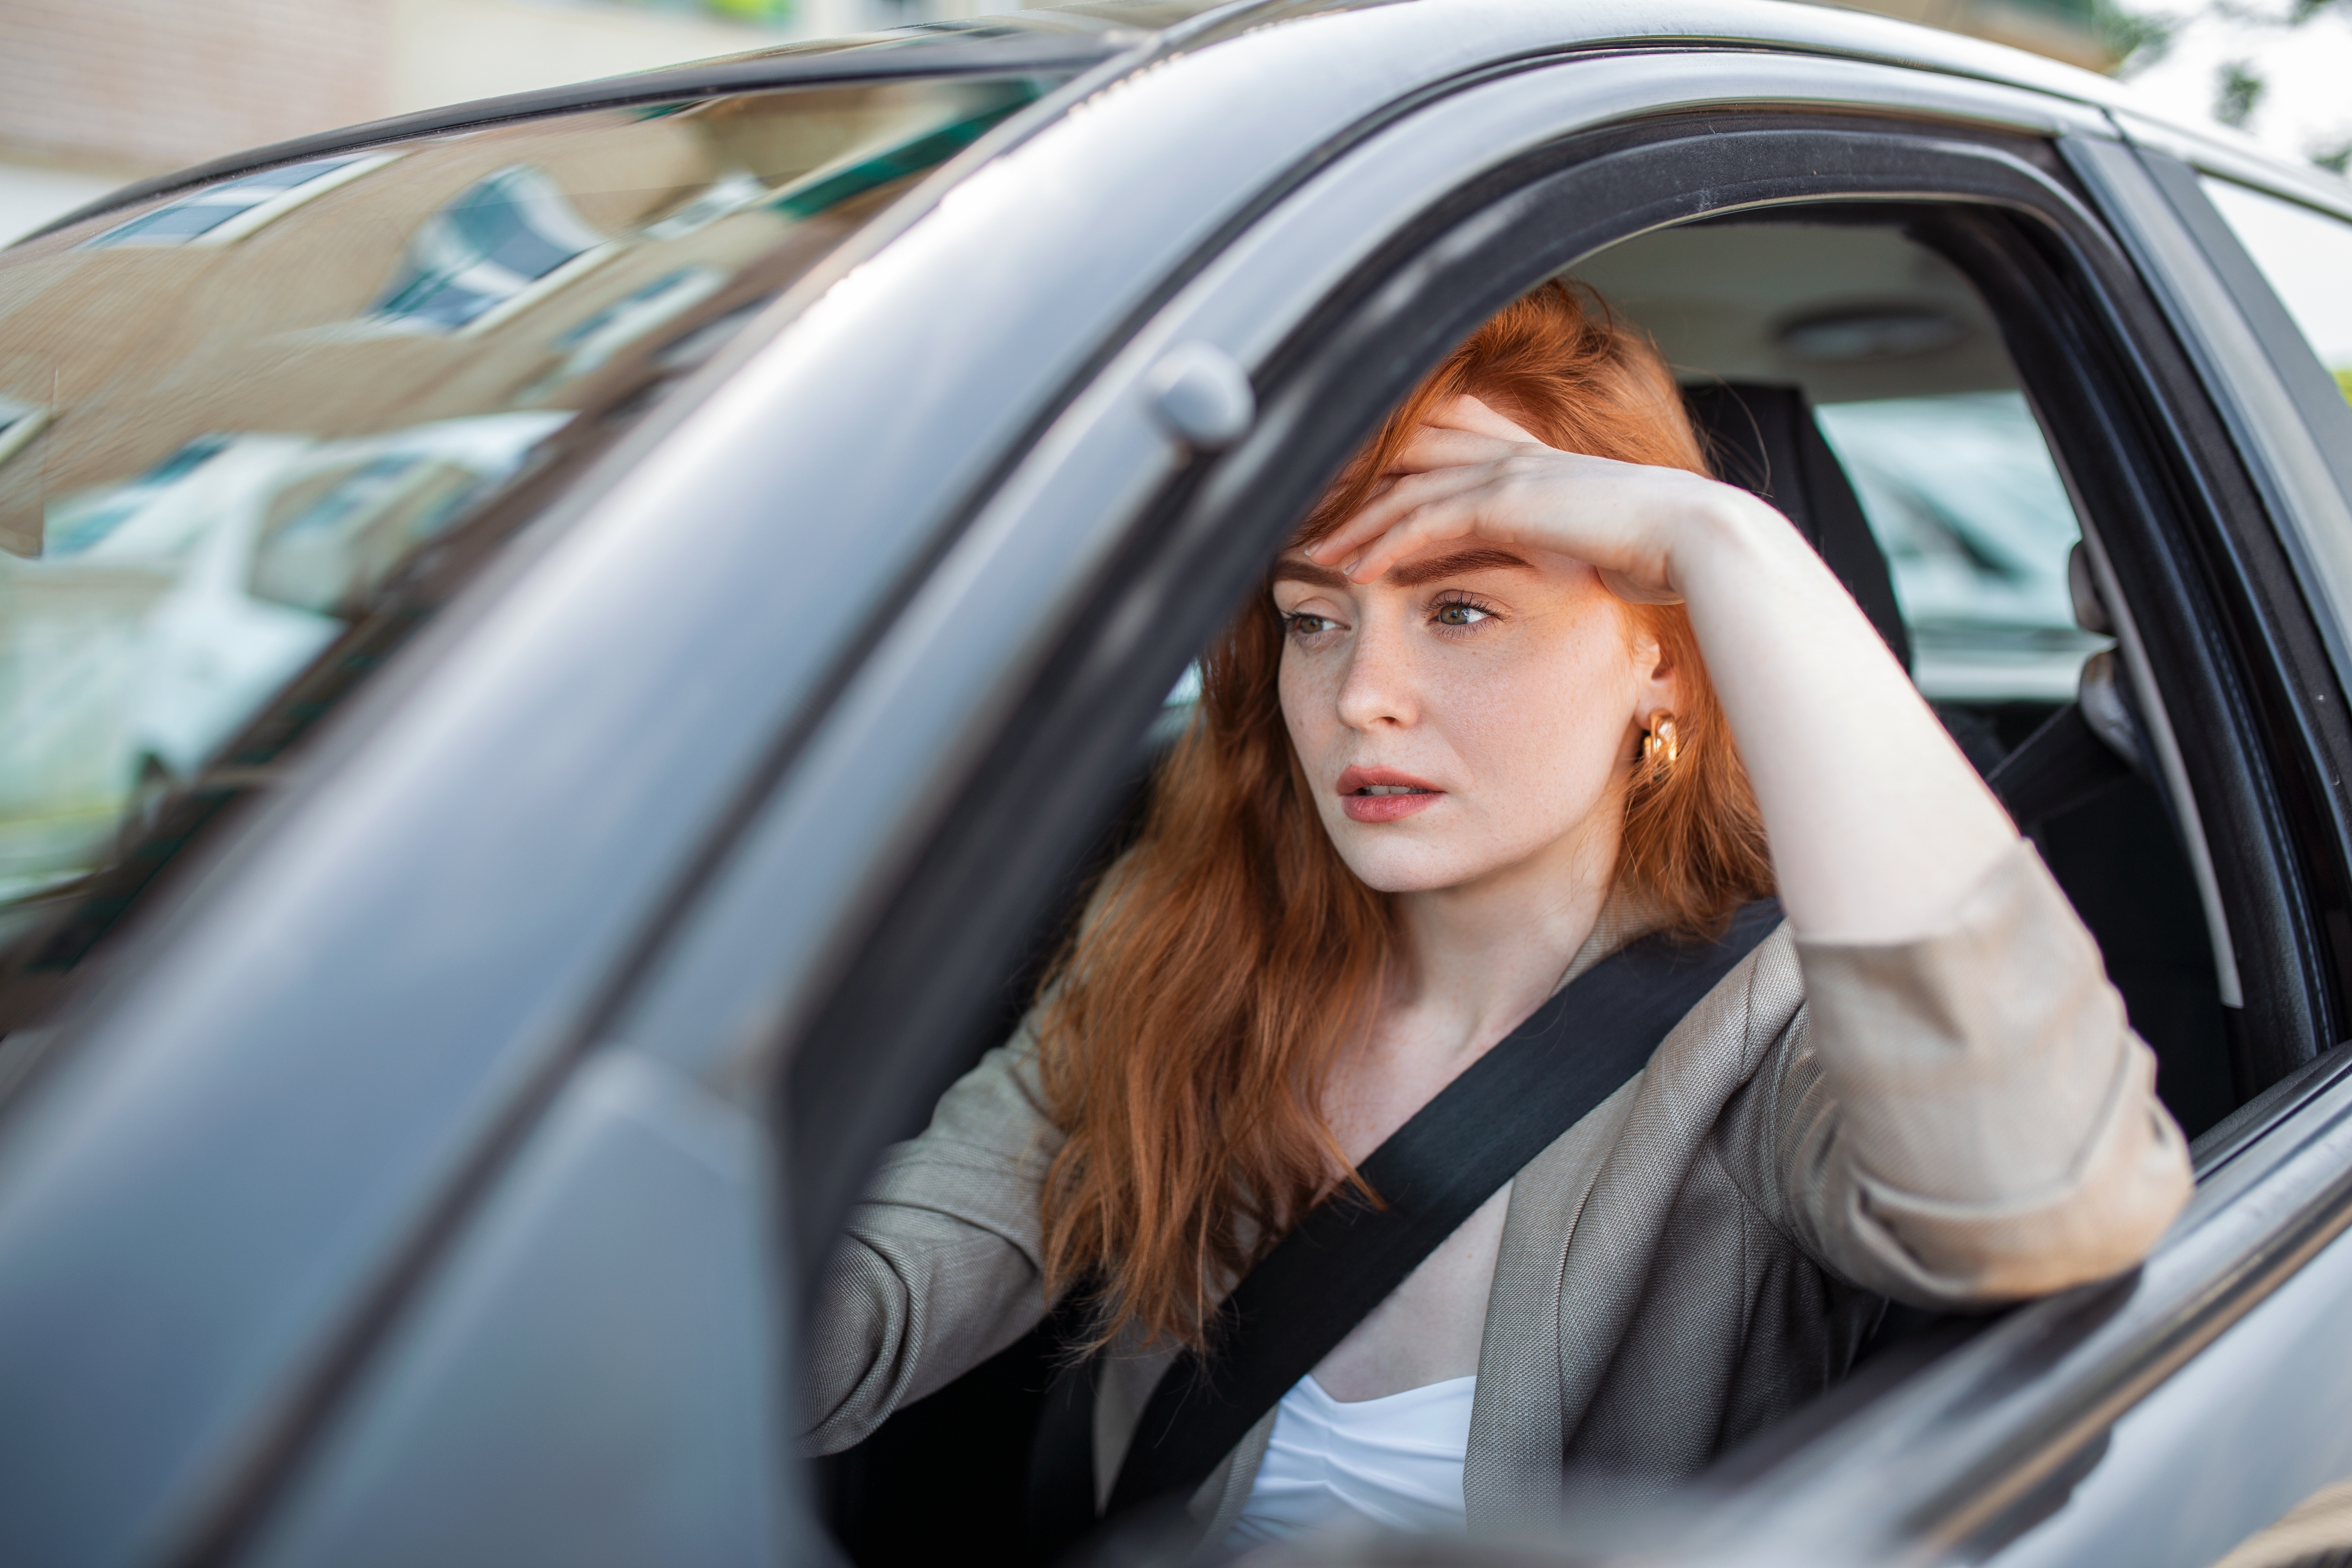 Nervous female driver sits at wheel | Source: Shutterstock